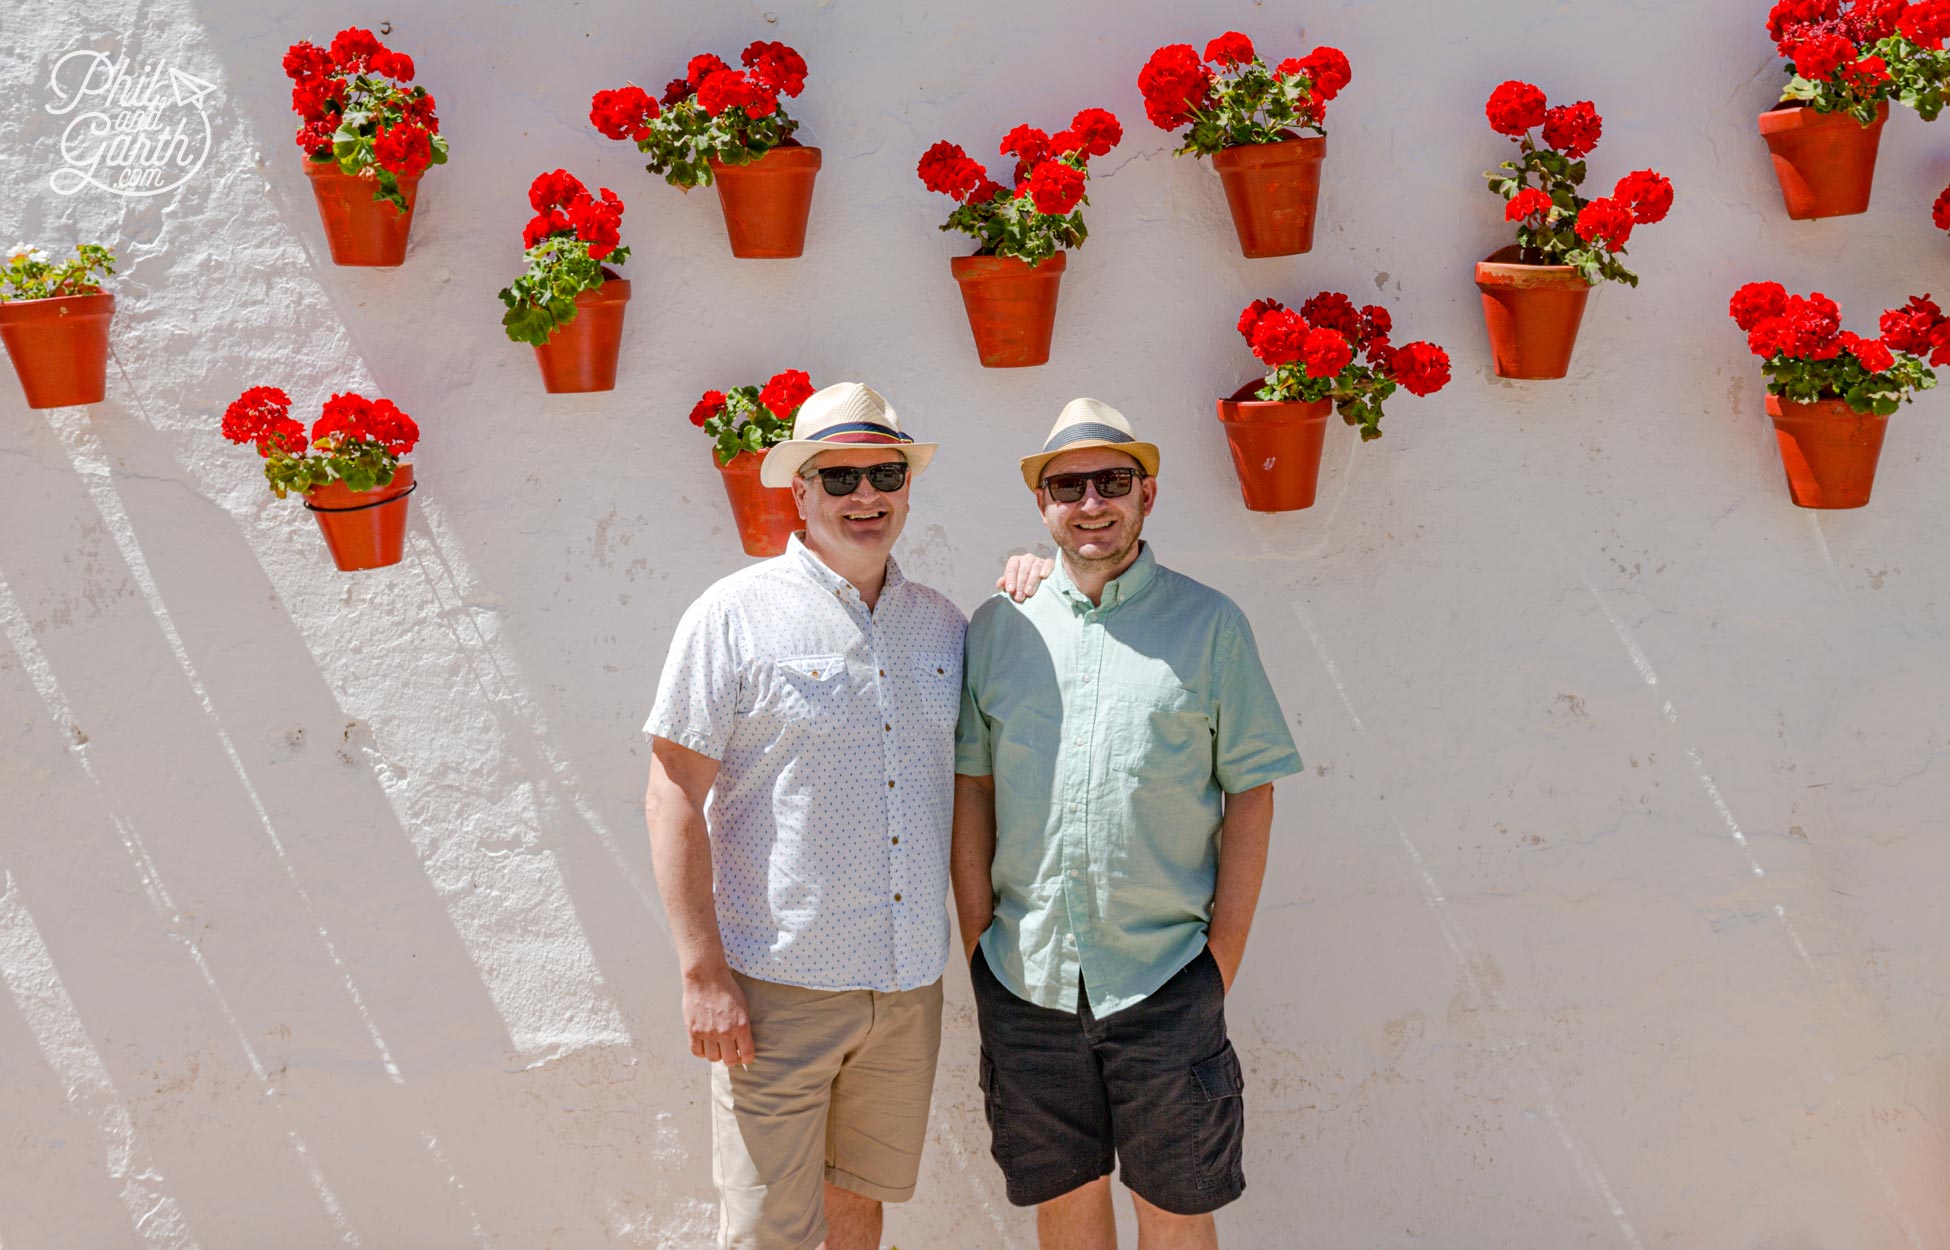 Phil and Garth's Top 5 Marbella Tips